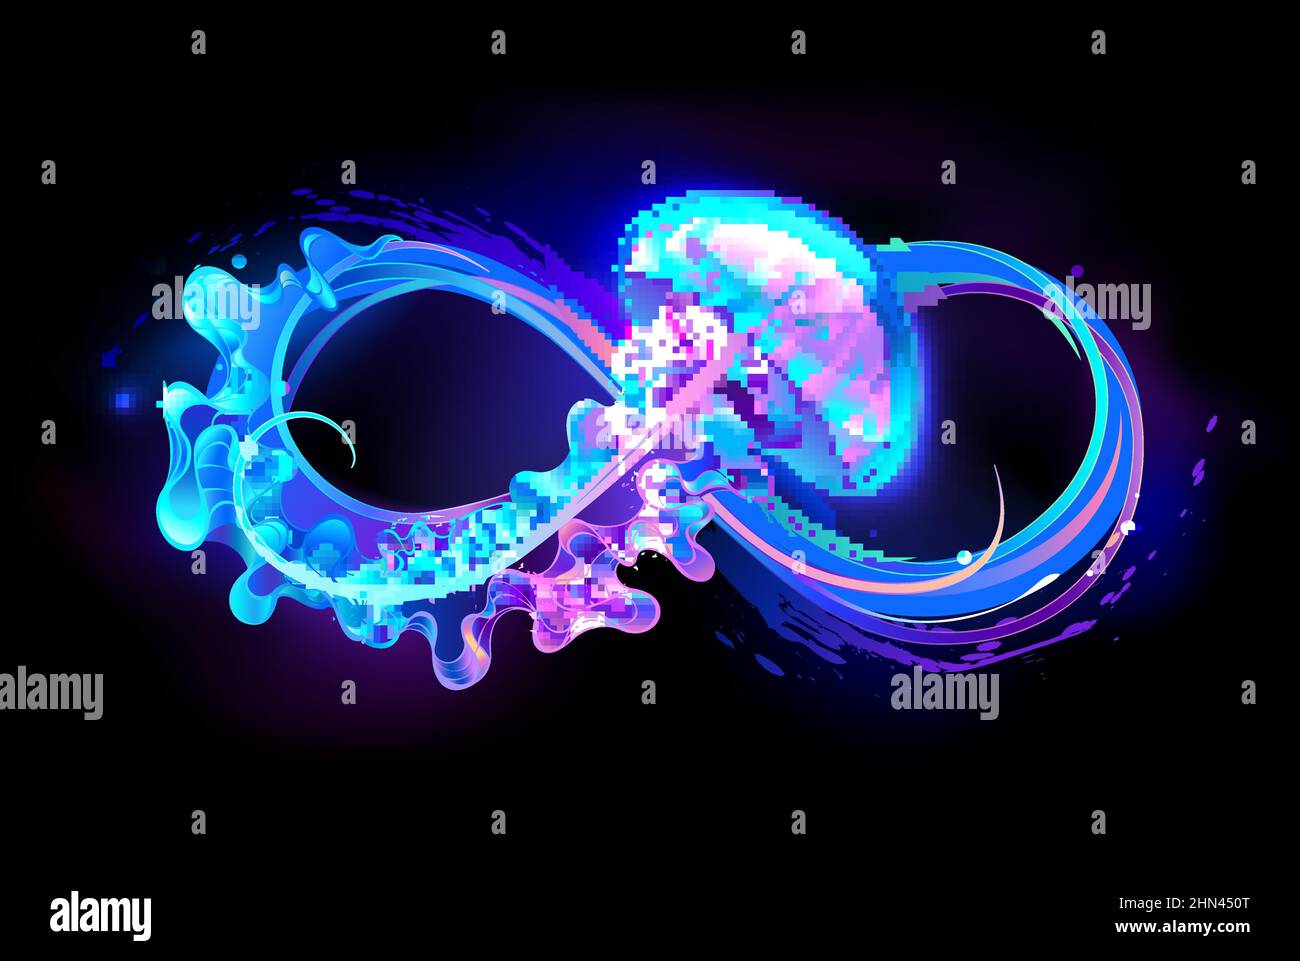 Luminous, glowing infinity symbol with purple, bioluminescent, vibrant, fluorescent jellyfish adorned with long tentacles on black background. Underwa Stock Vector